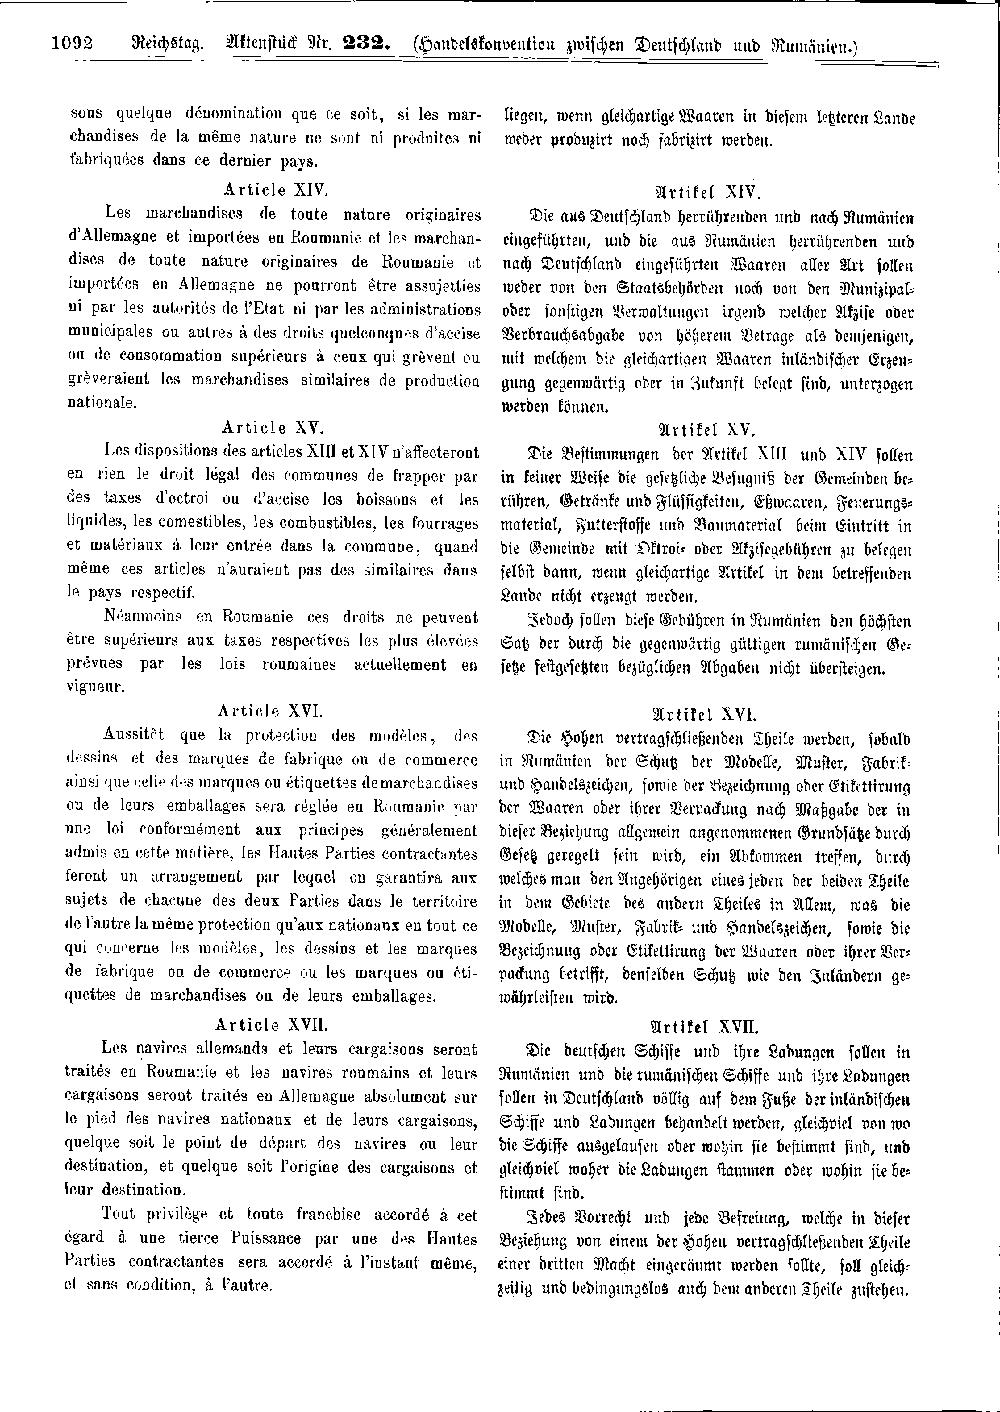 Scan of page 1092